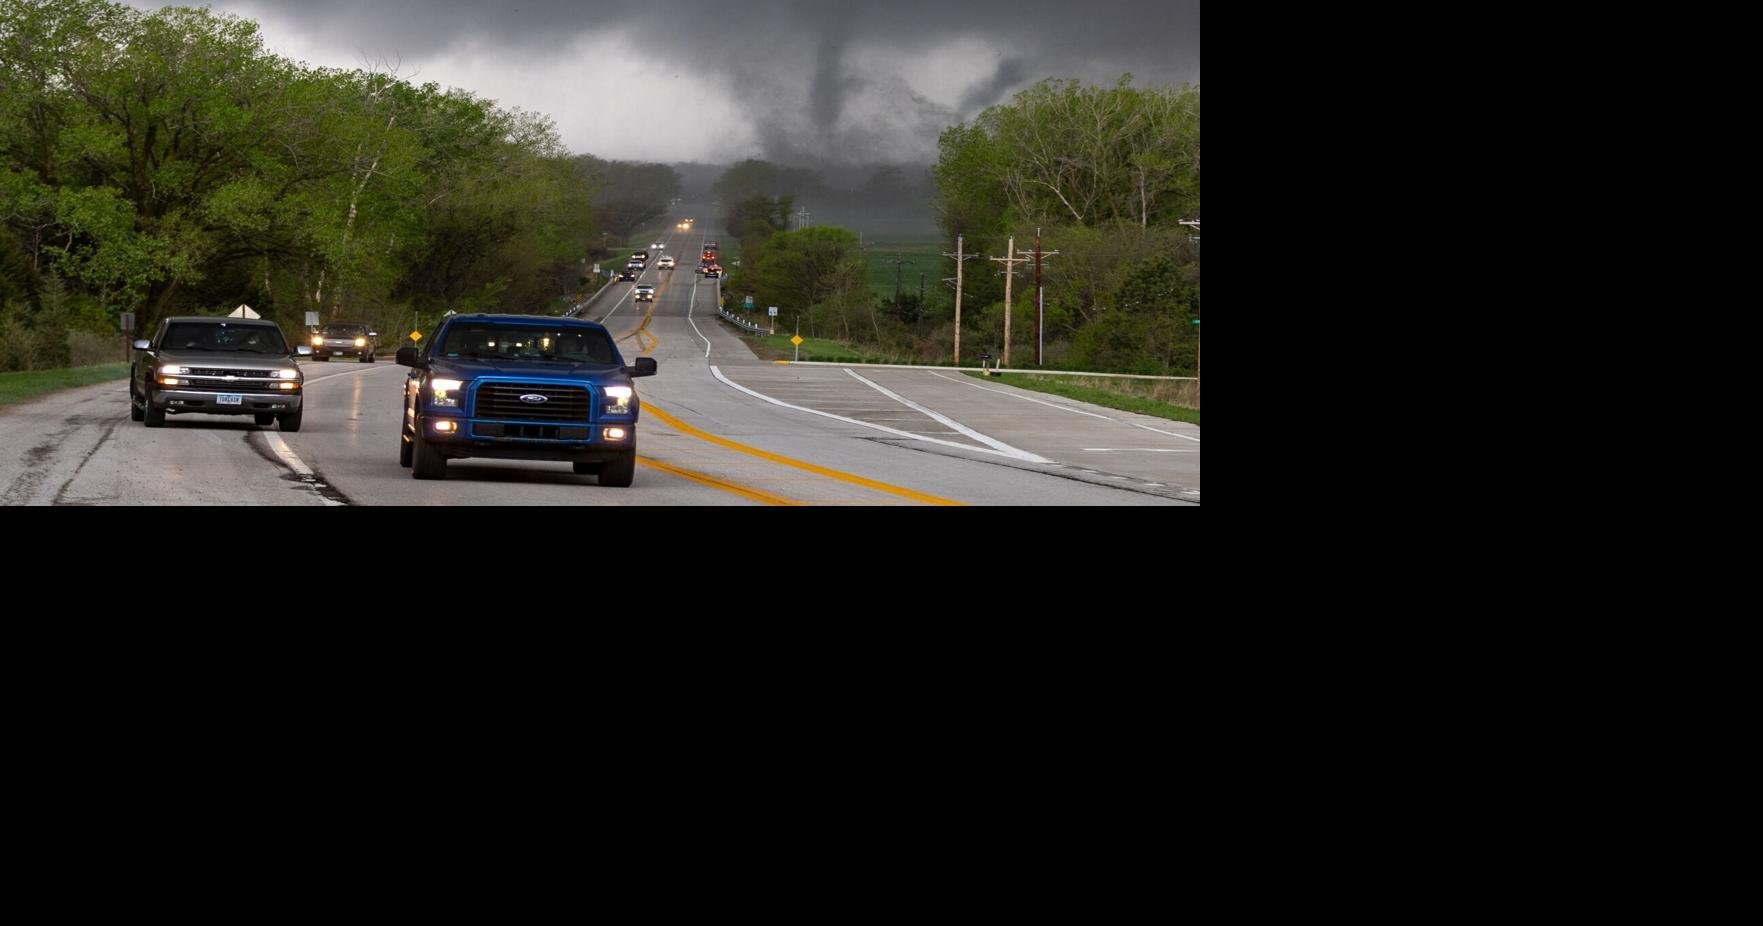 Tornadoes threaten in latest forecast, learn and be safe with these